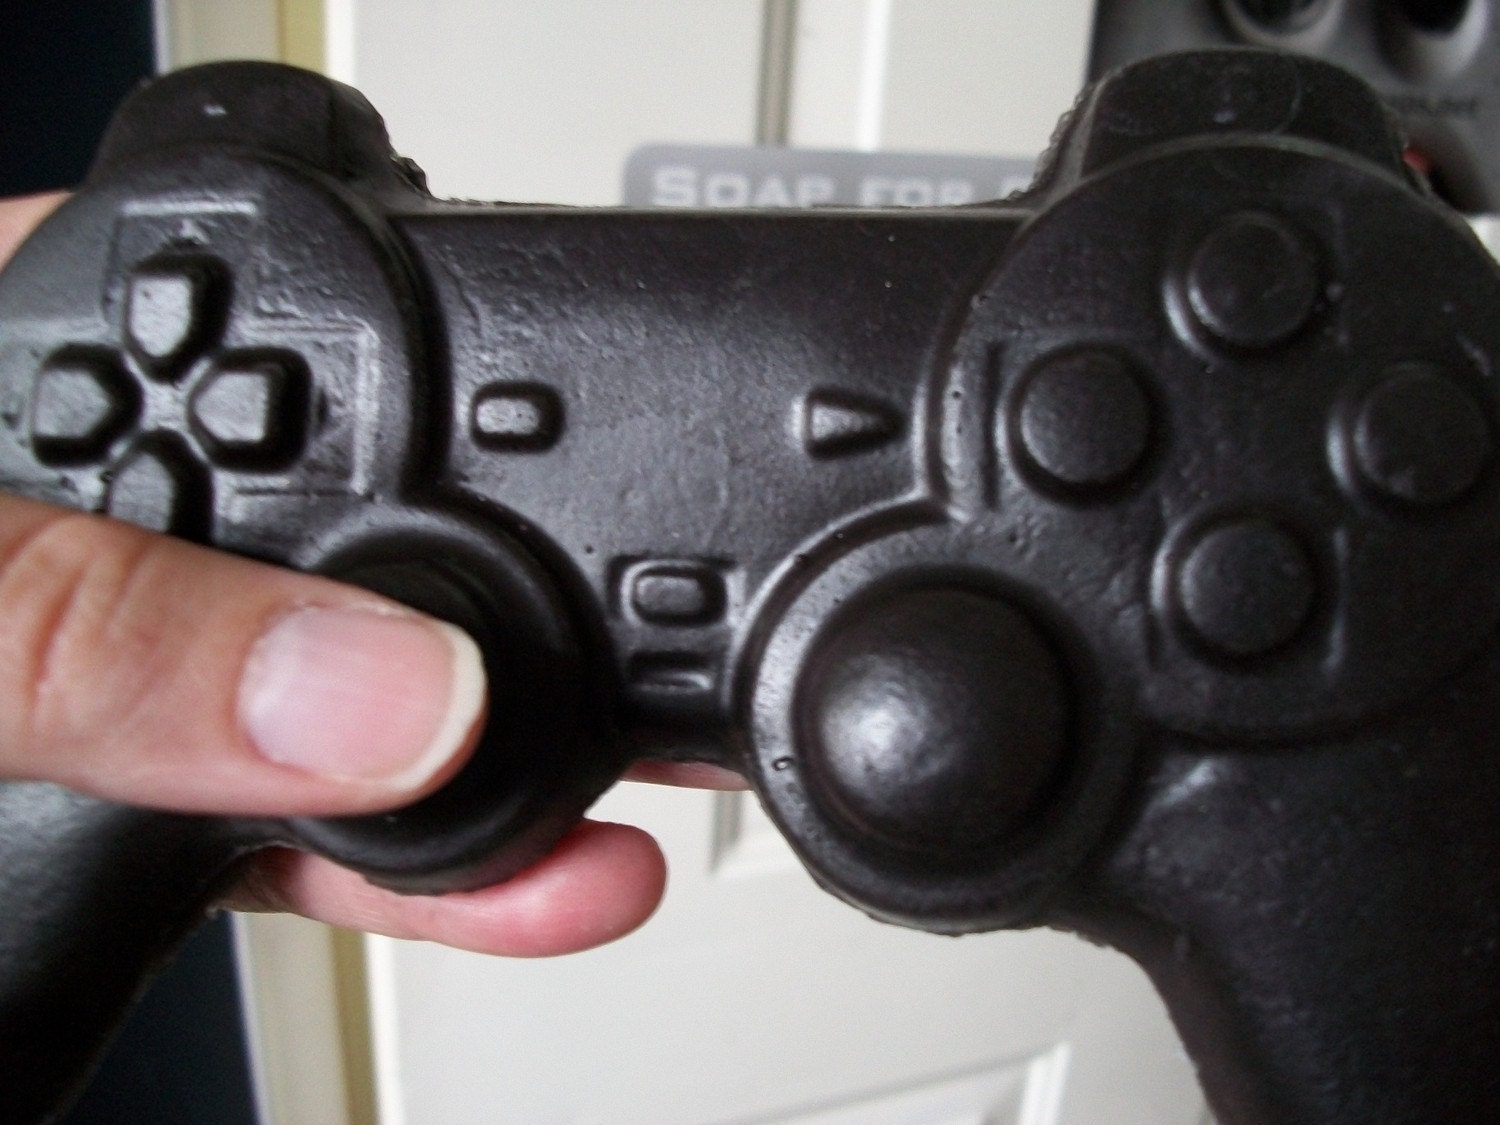 SOAP PlayStation Controller, Grapefruit Scented, Invented by DigitalSoaps